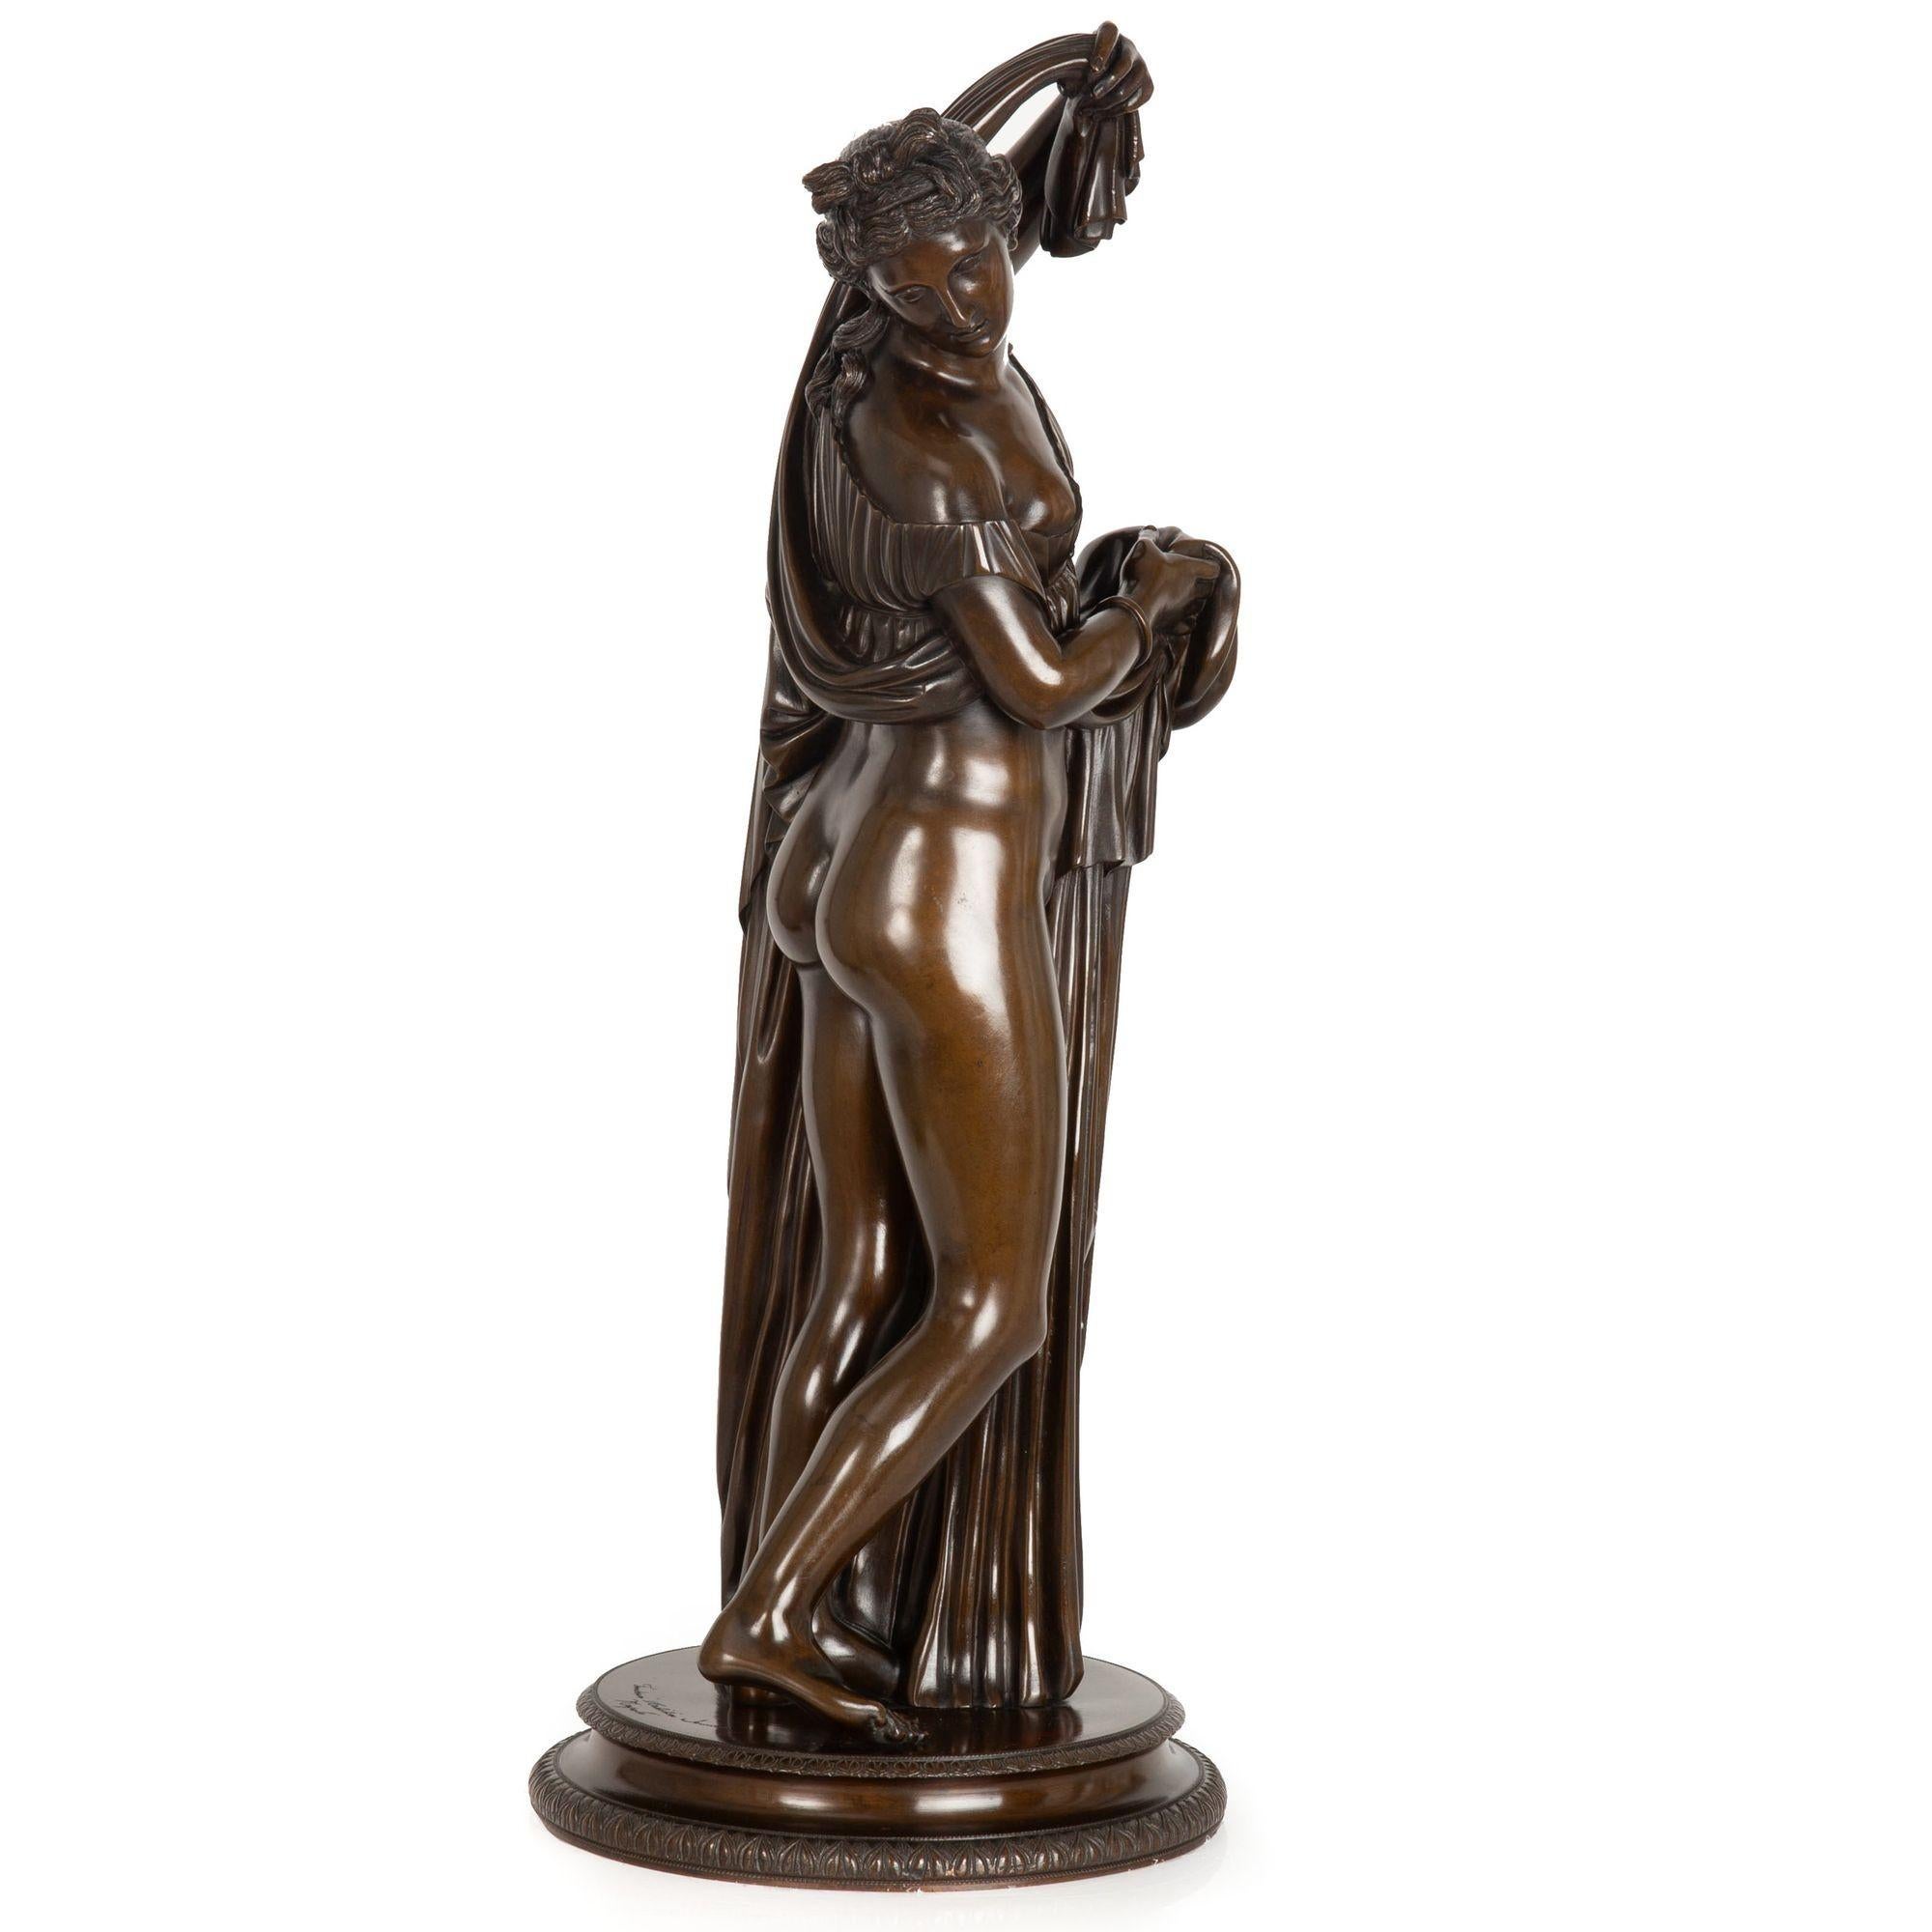 19th Century Grand Tour Bronze Sculpture “Callipygian Venus” of Antiquity In Good Condition For Sale In Shippensburg, PA